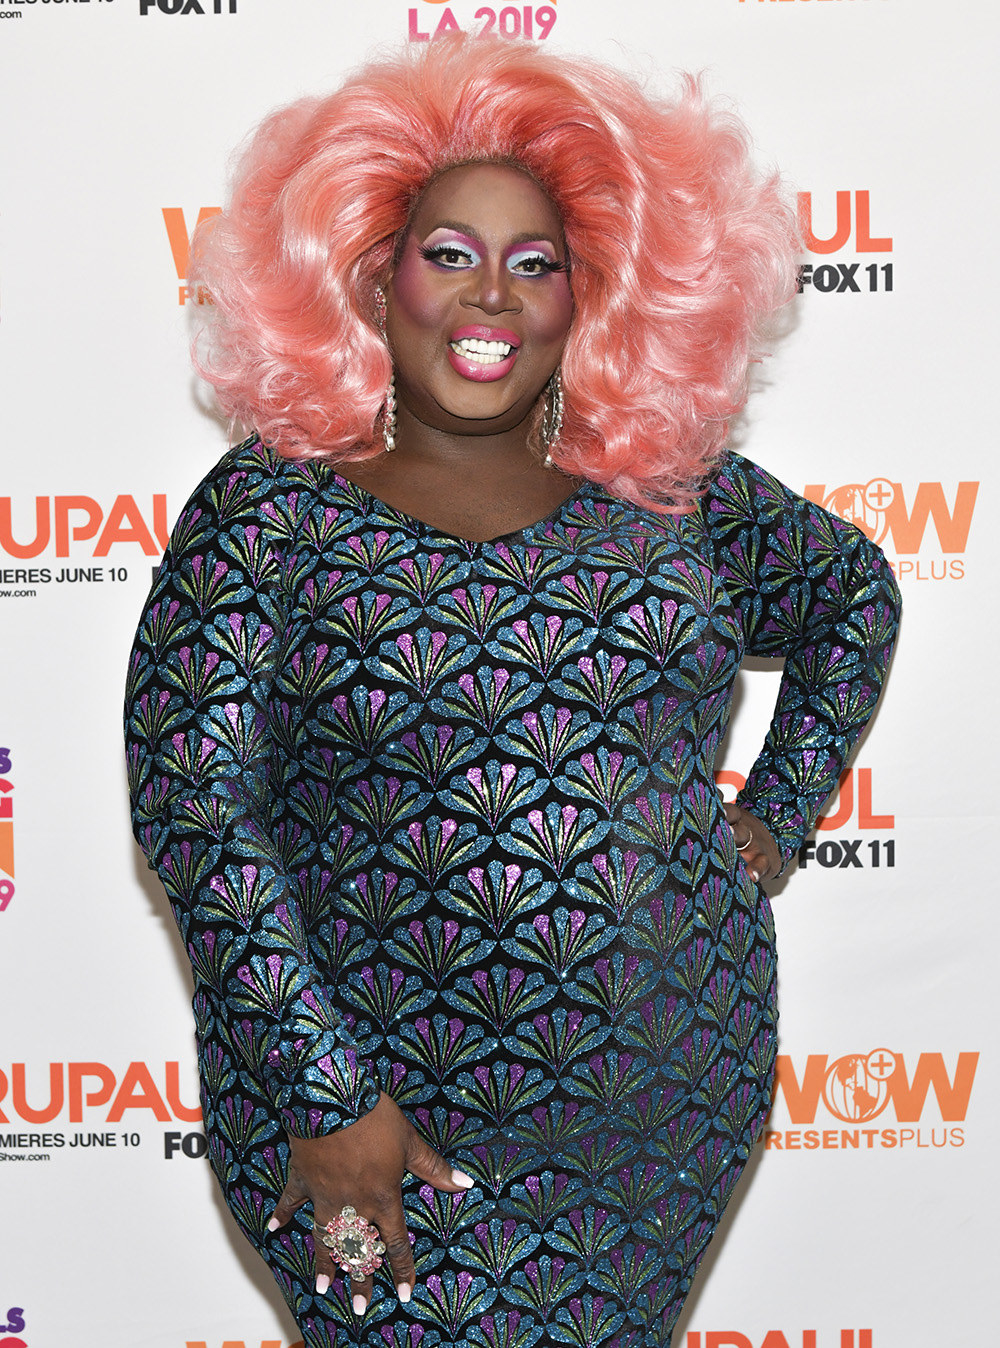 RuPauls Drag Race Queens Discuss How Racism From Fans Has Affected Their Success